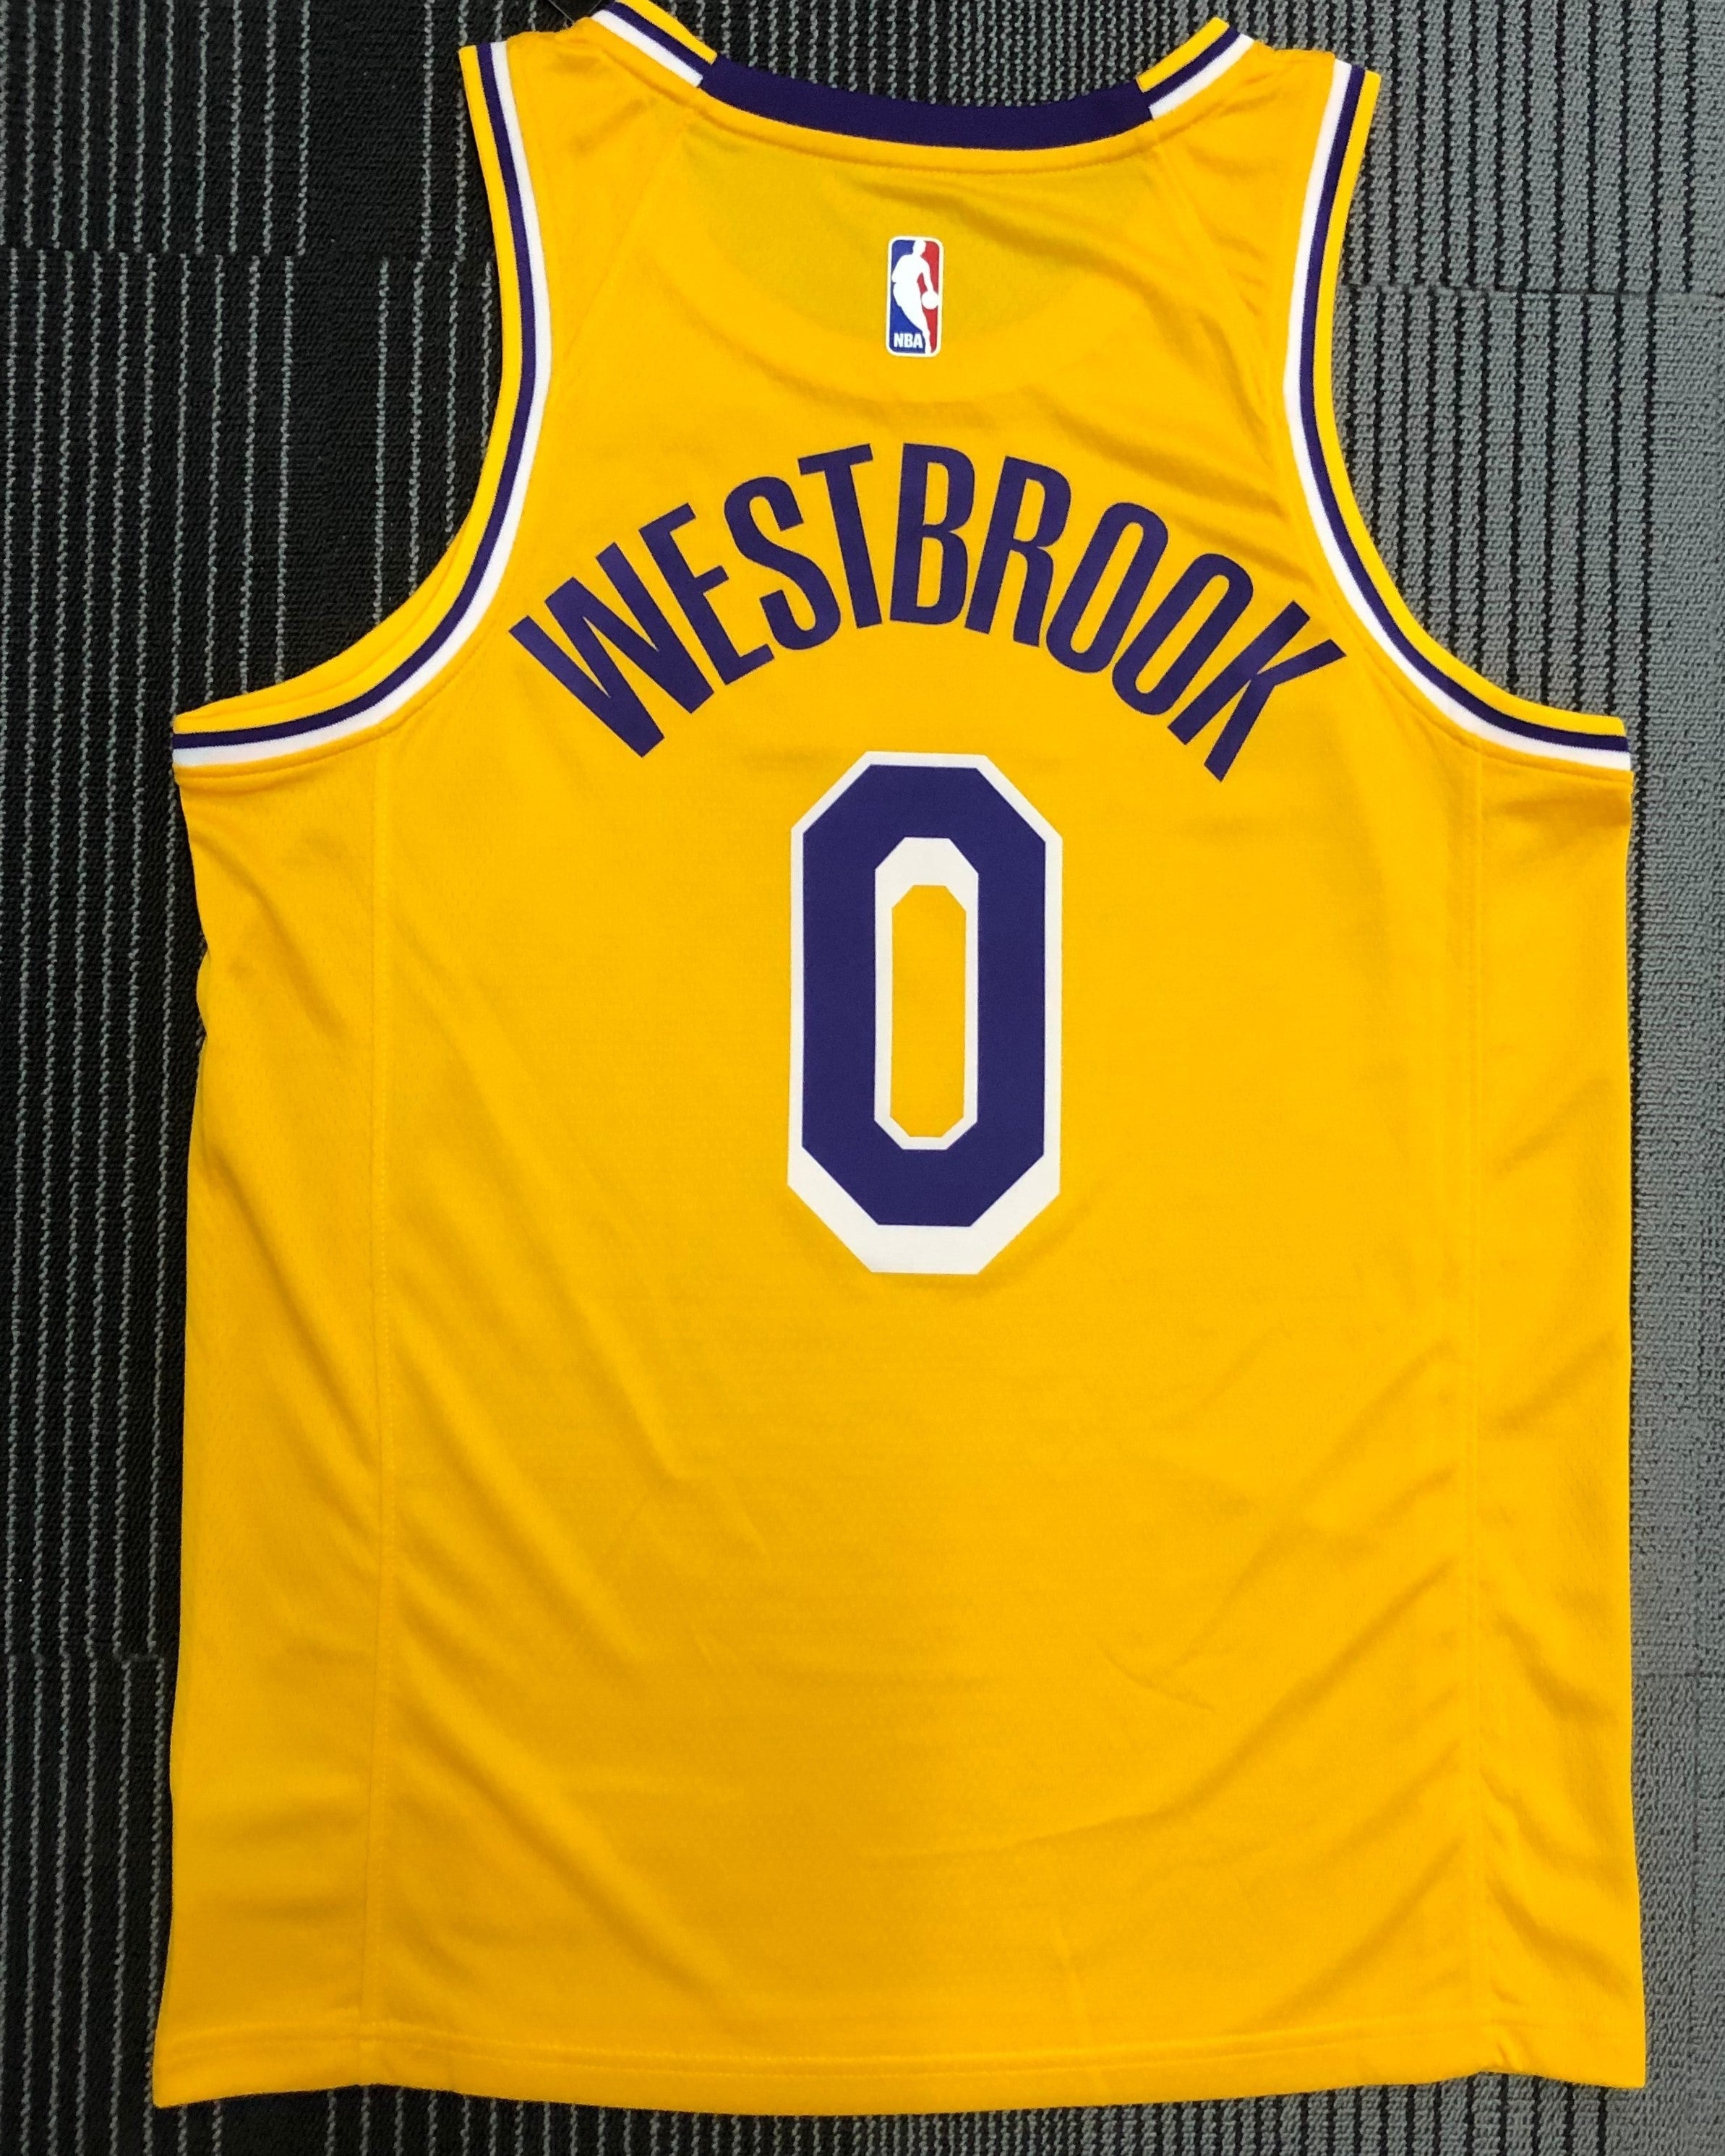 WESTBROOK RUSSELL (LaL)